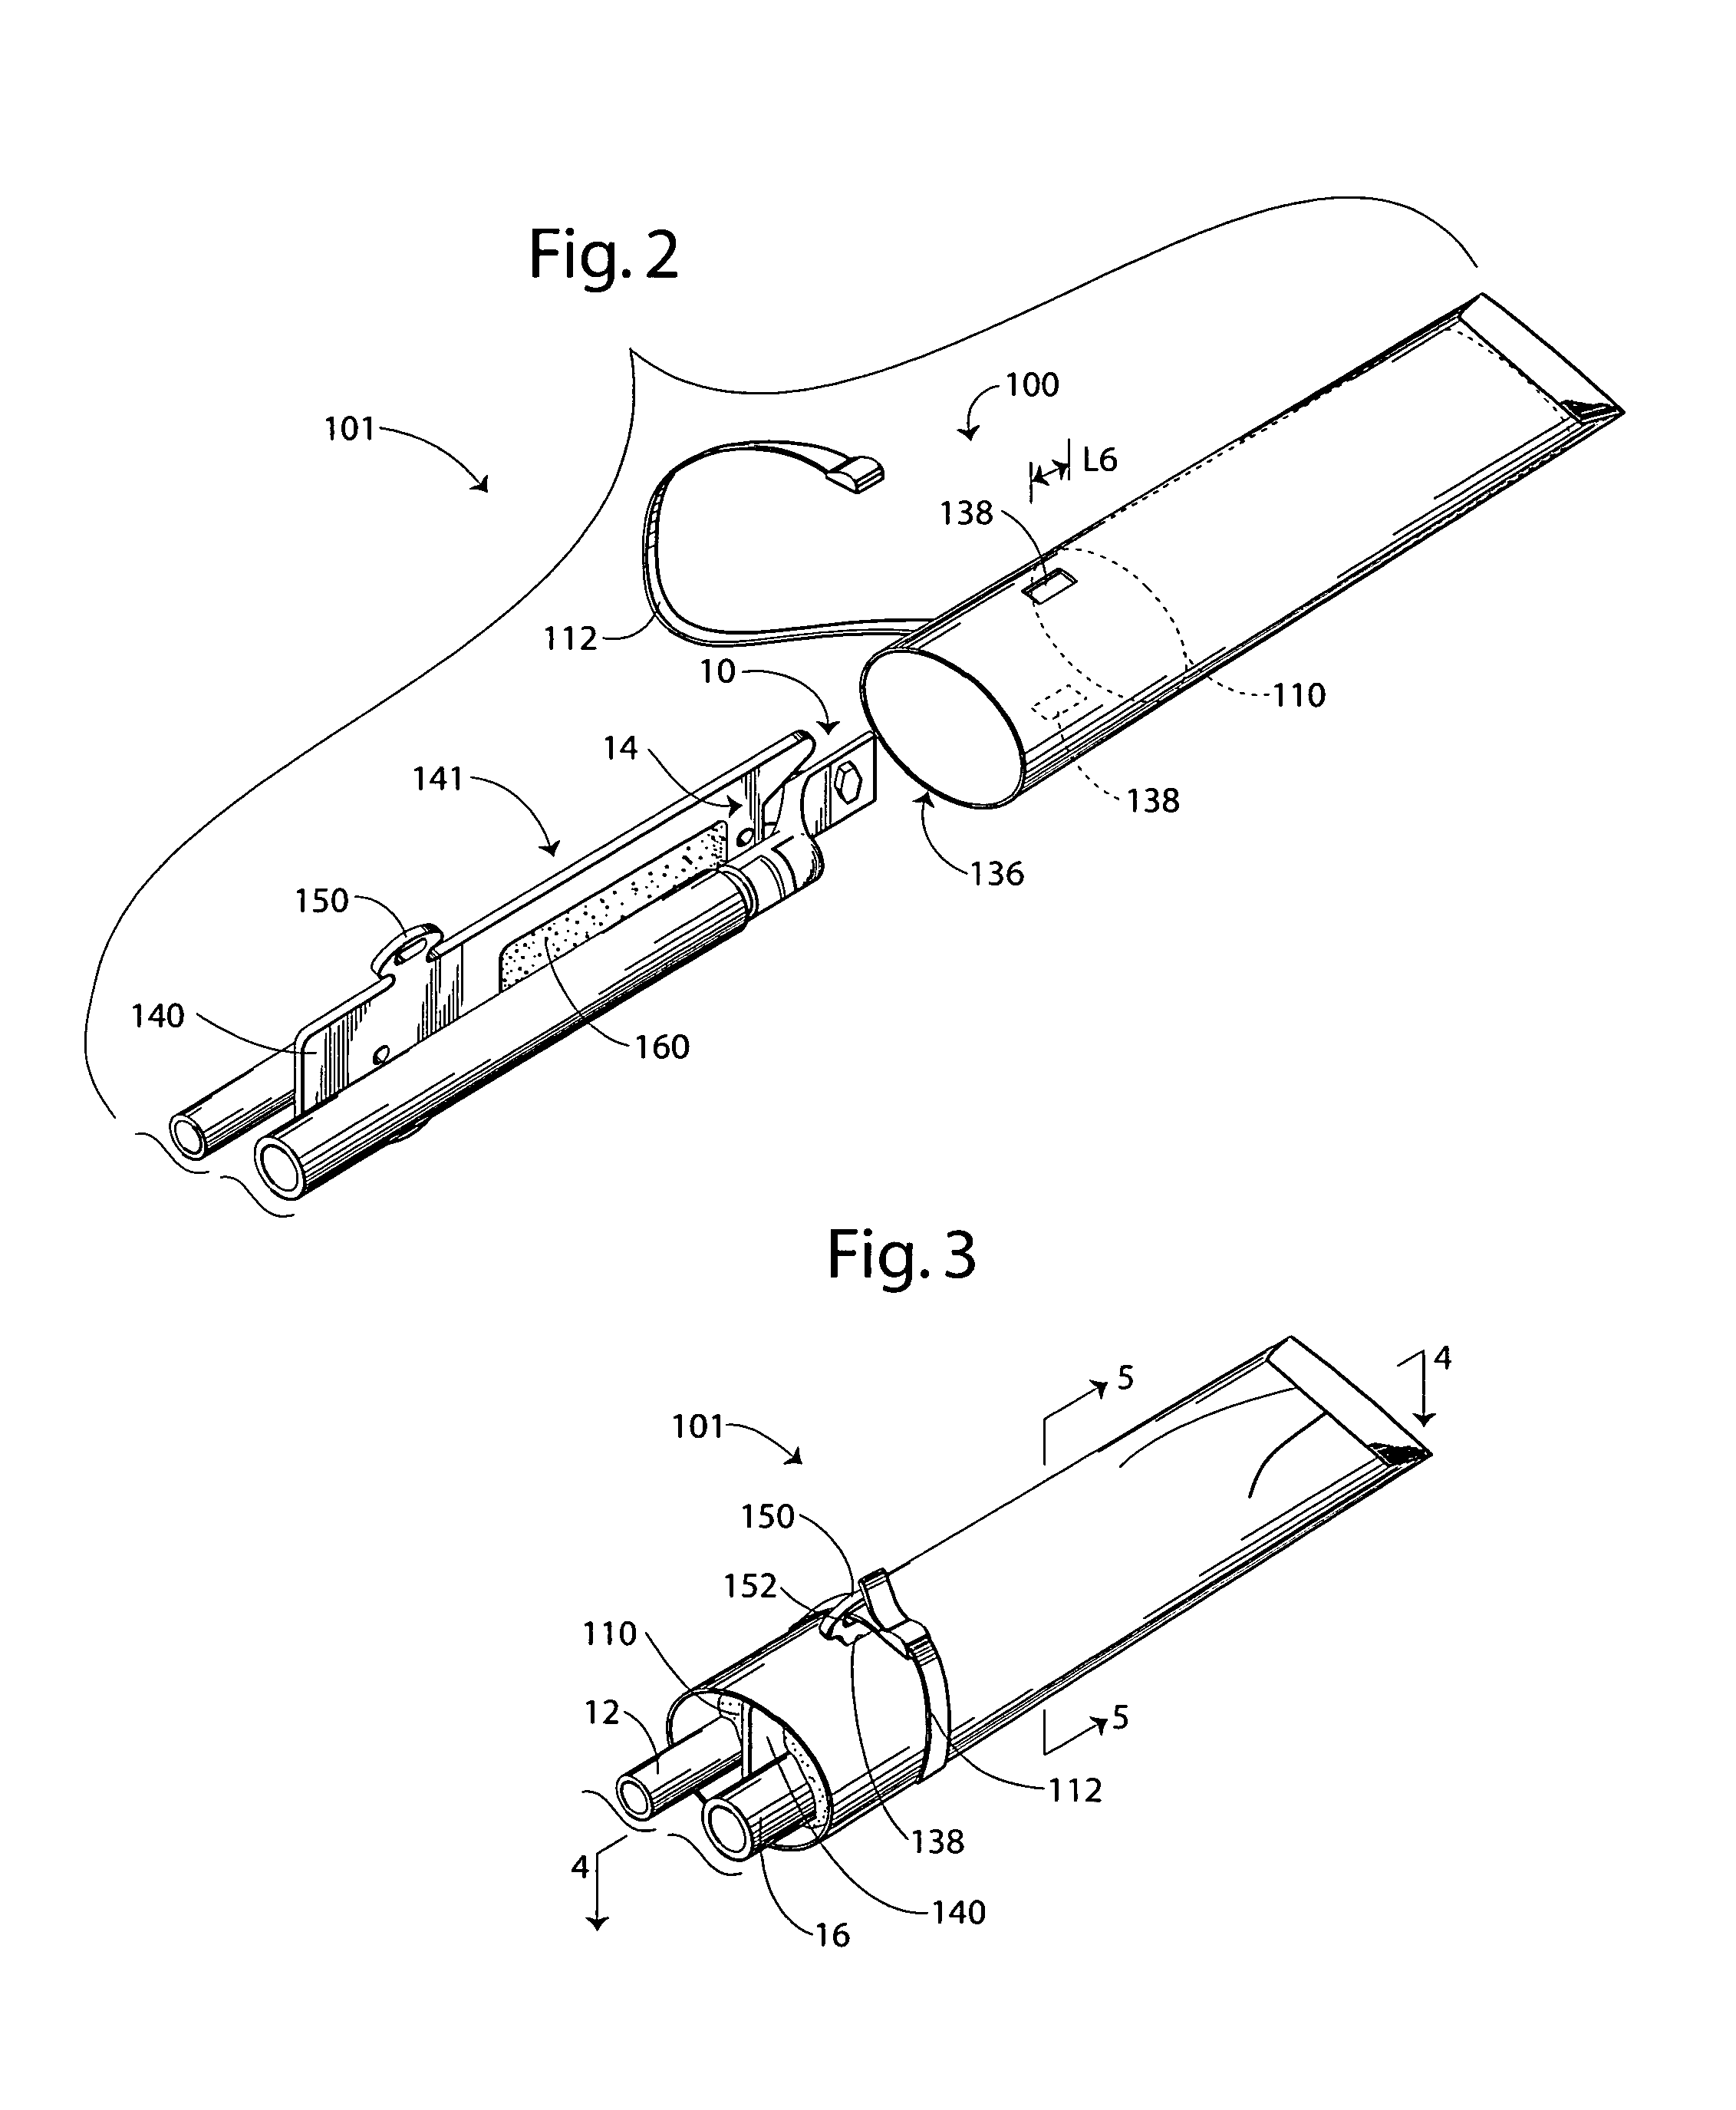 Electrical connection protector kits, insert assemblies and methods for using the same